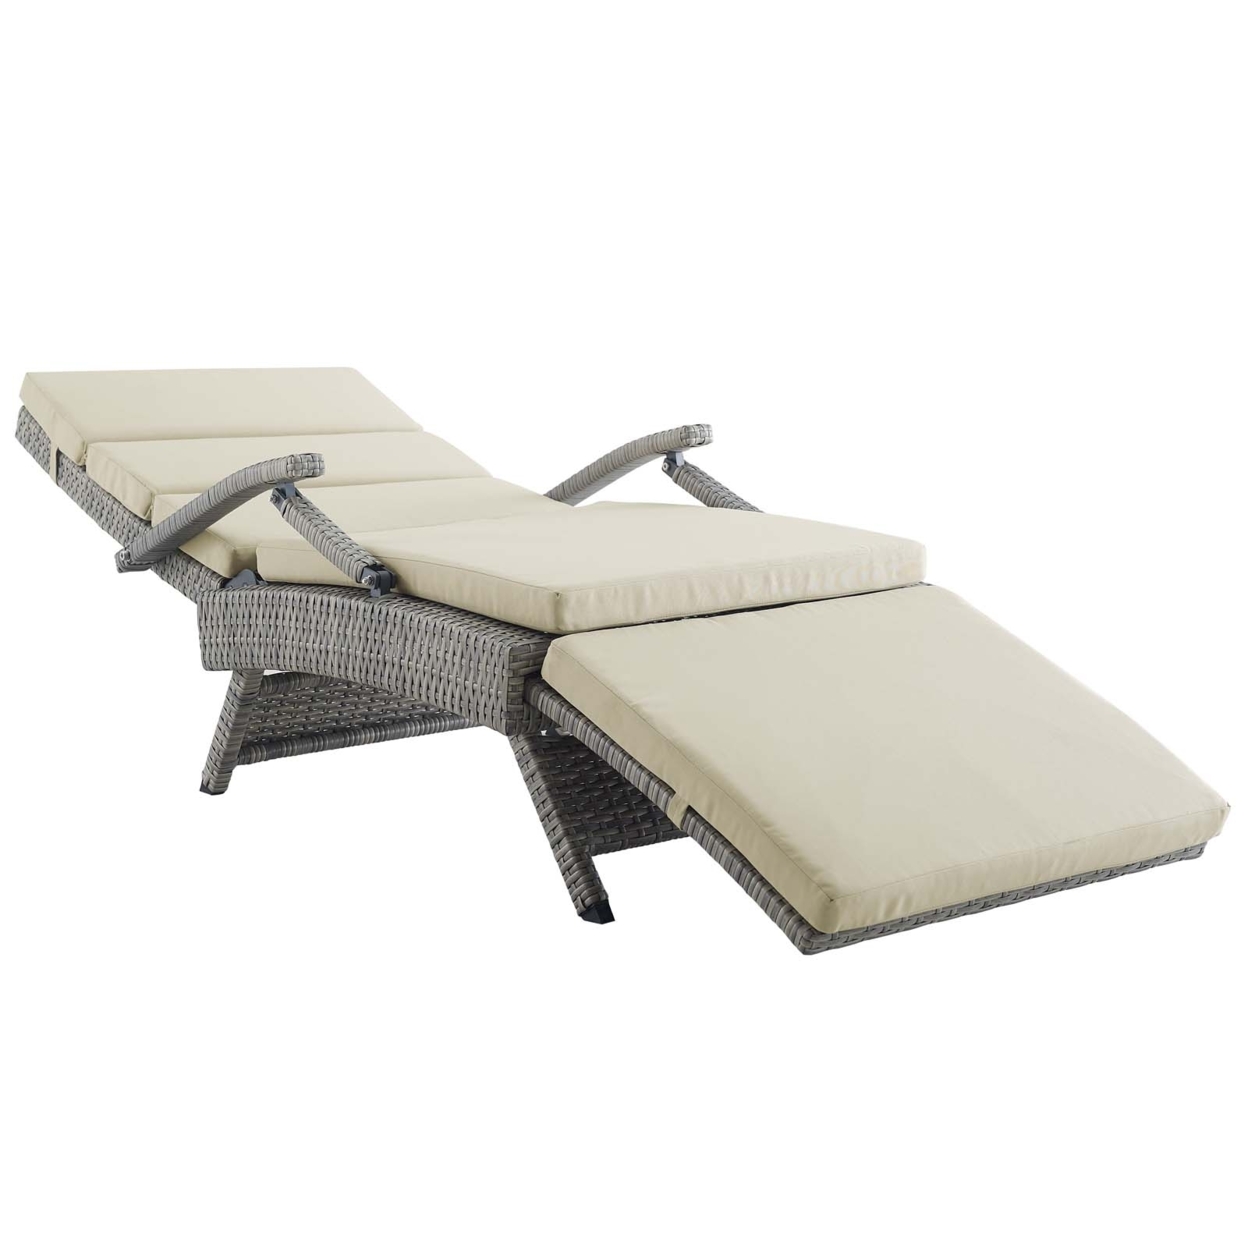 Envisage Chaise Outdoor Patio Wicker Rattan Lounge ChairLight Gray Beige - image 5 of 7